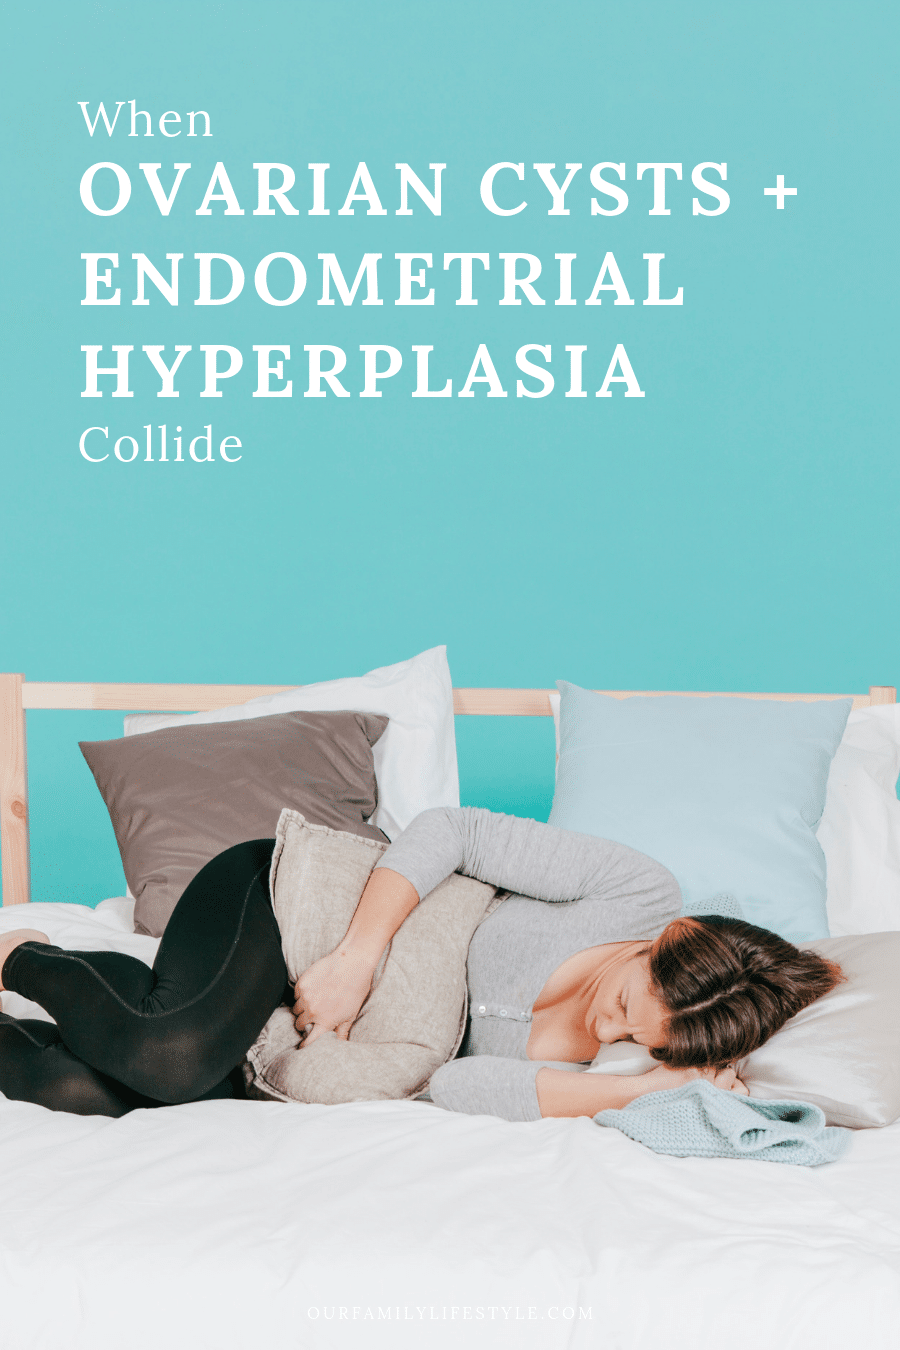 When Ovarian Cysts + Endometrial Hyperplasia Collide